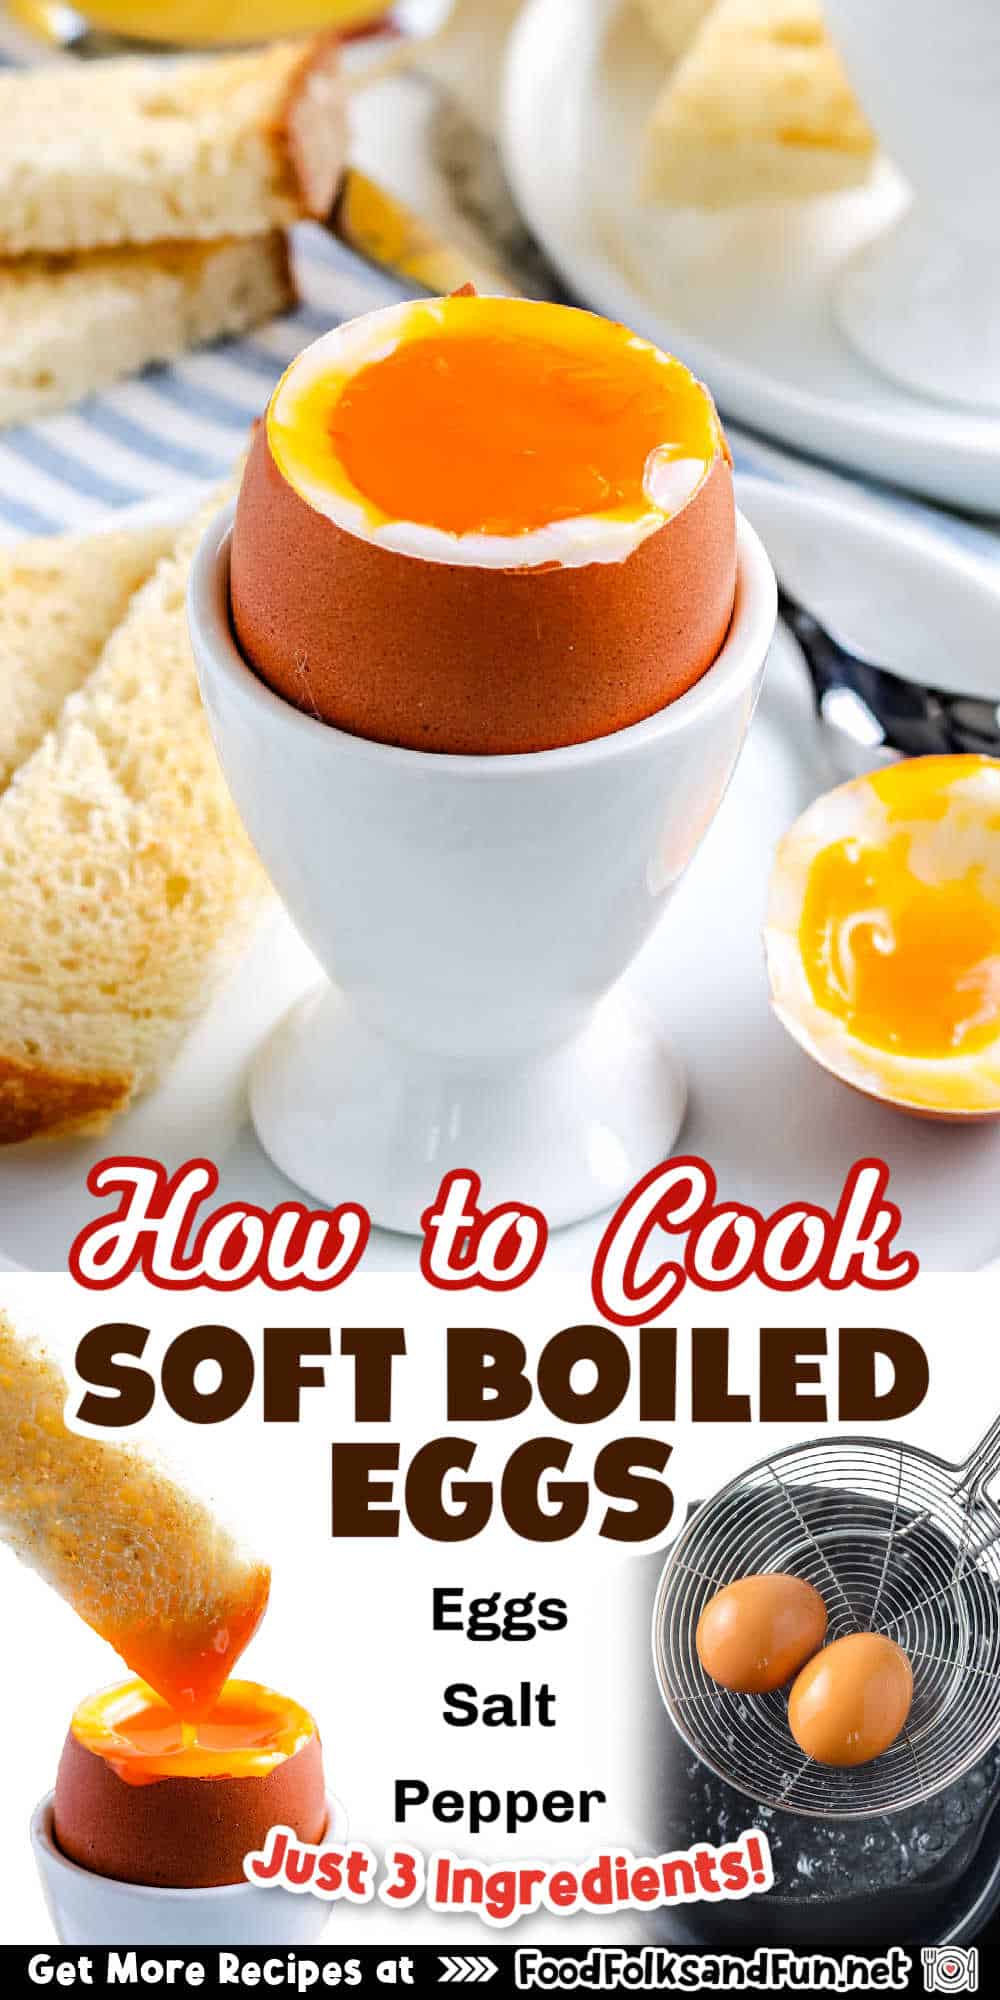 Making soft-boiled eggs is simple. All you need is eggs, salt, water, and ice. This tutorial for How To Make Soft Boiled Eggs is a foolproof method that yields perfect results every time. via @foodfolksandfun